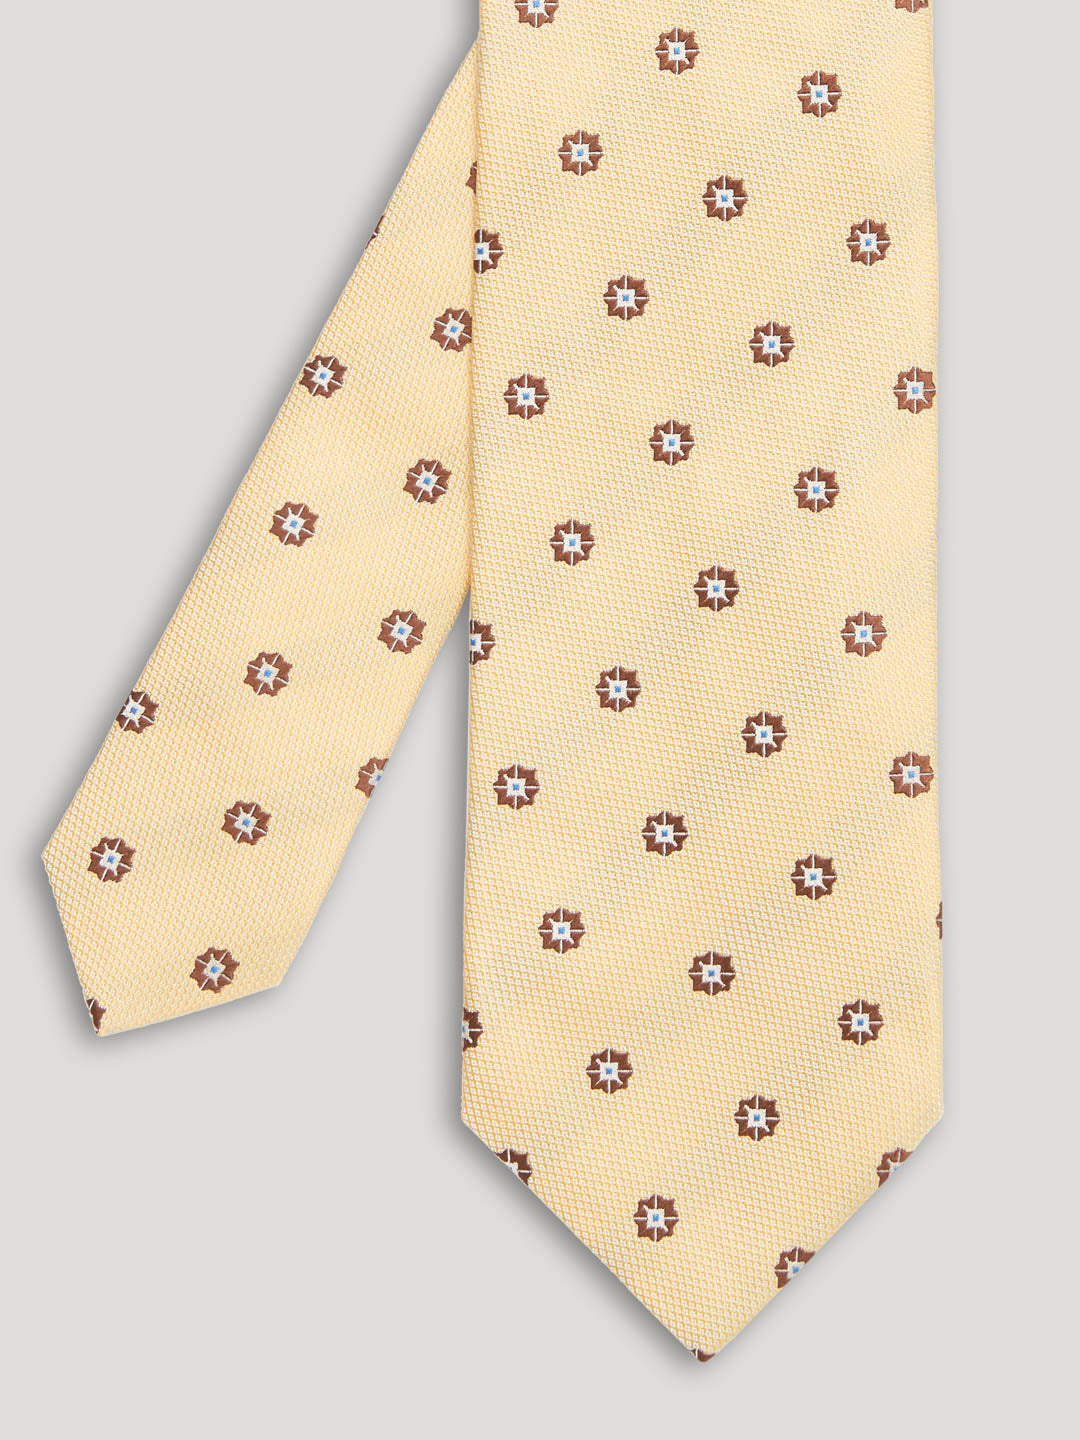 Yellow and brown tie with large pattern